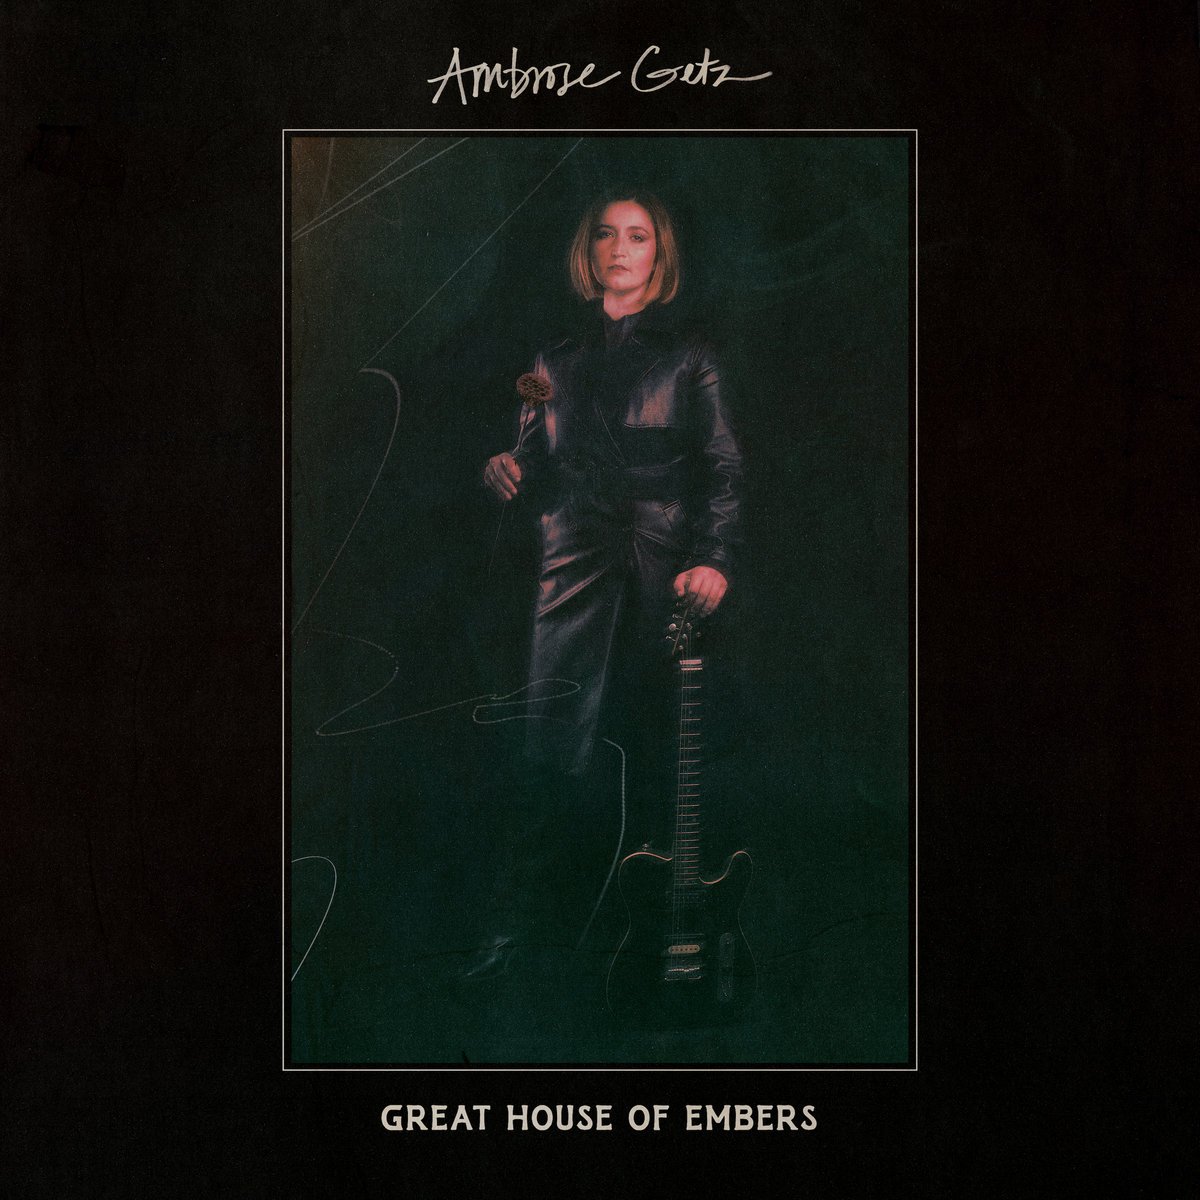 Ambrose Getz - Great House of Embers